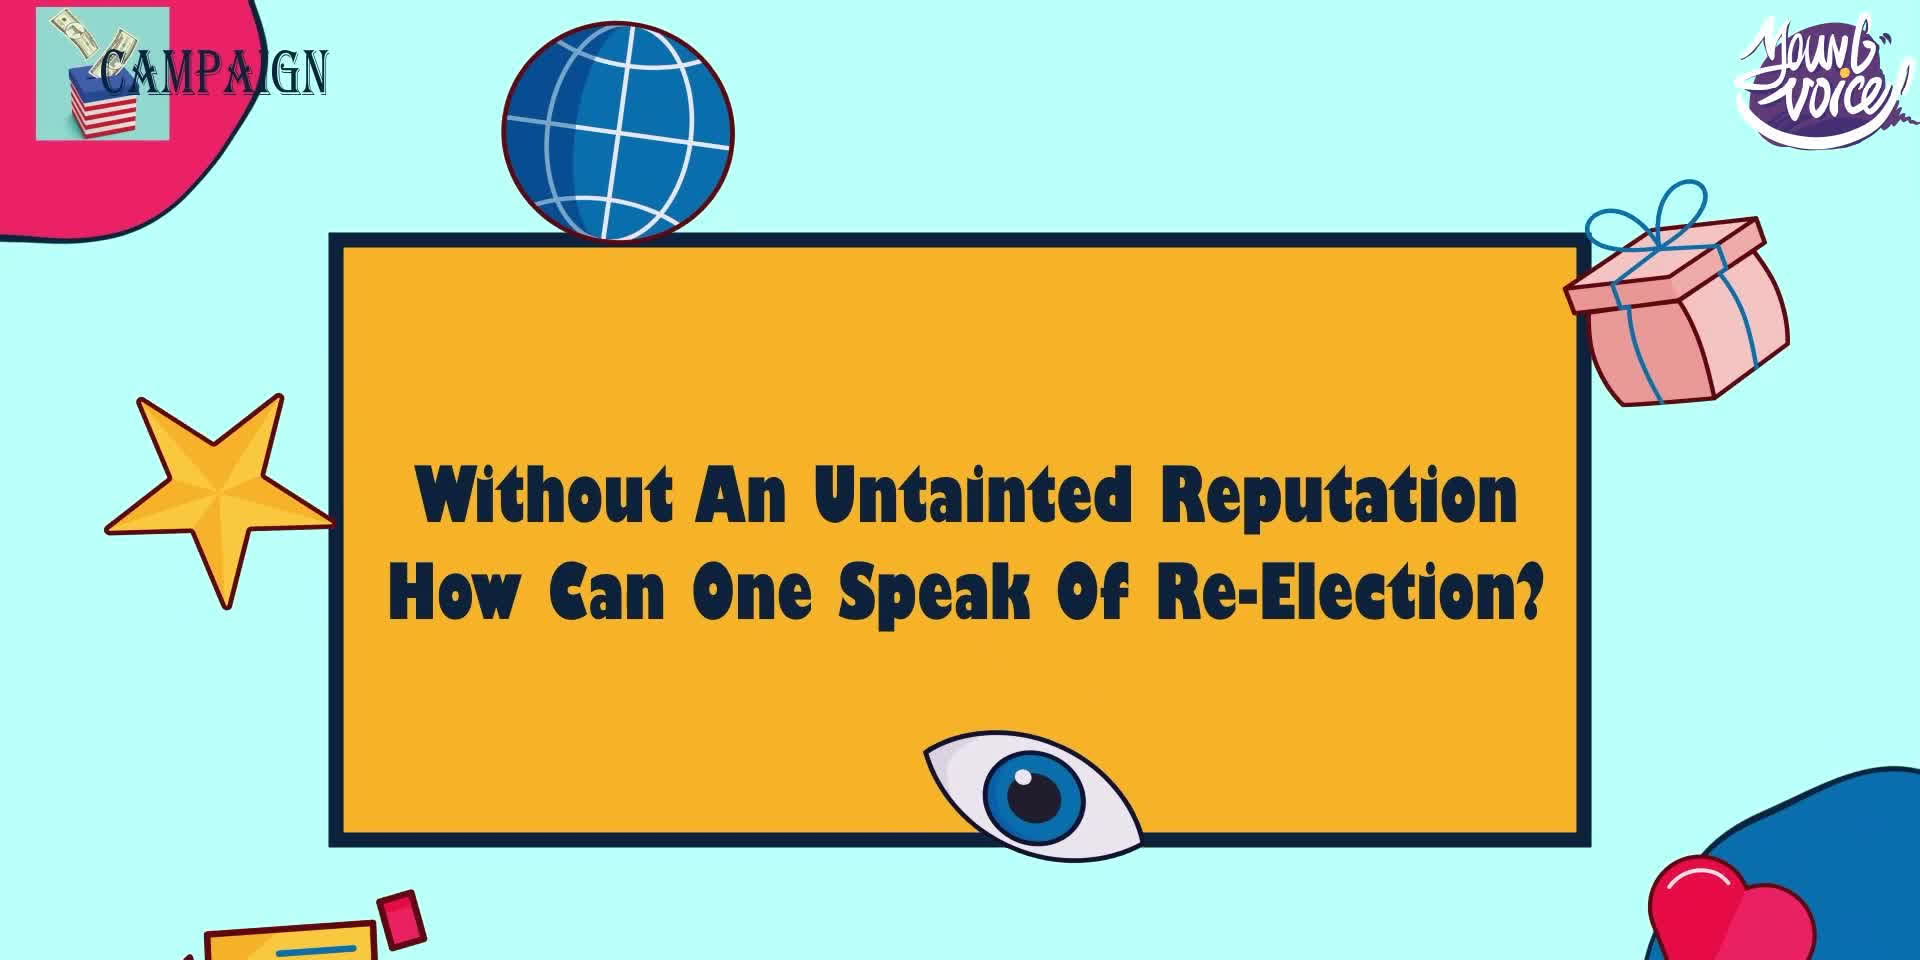 Watch This | Without an untainted reputation, how can one speak of re-election?